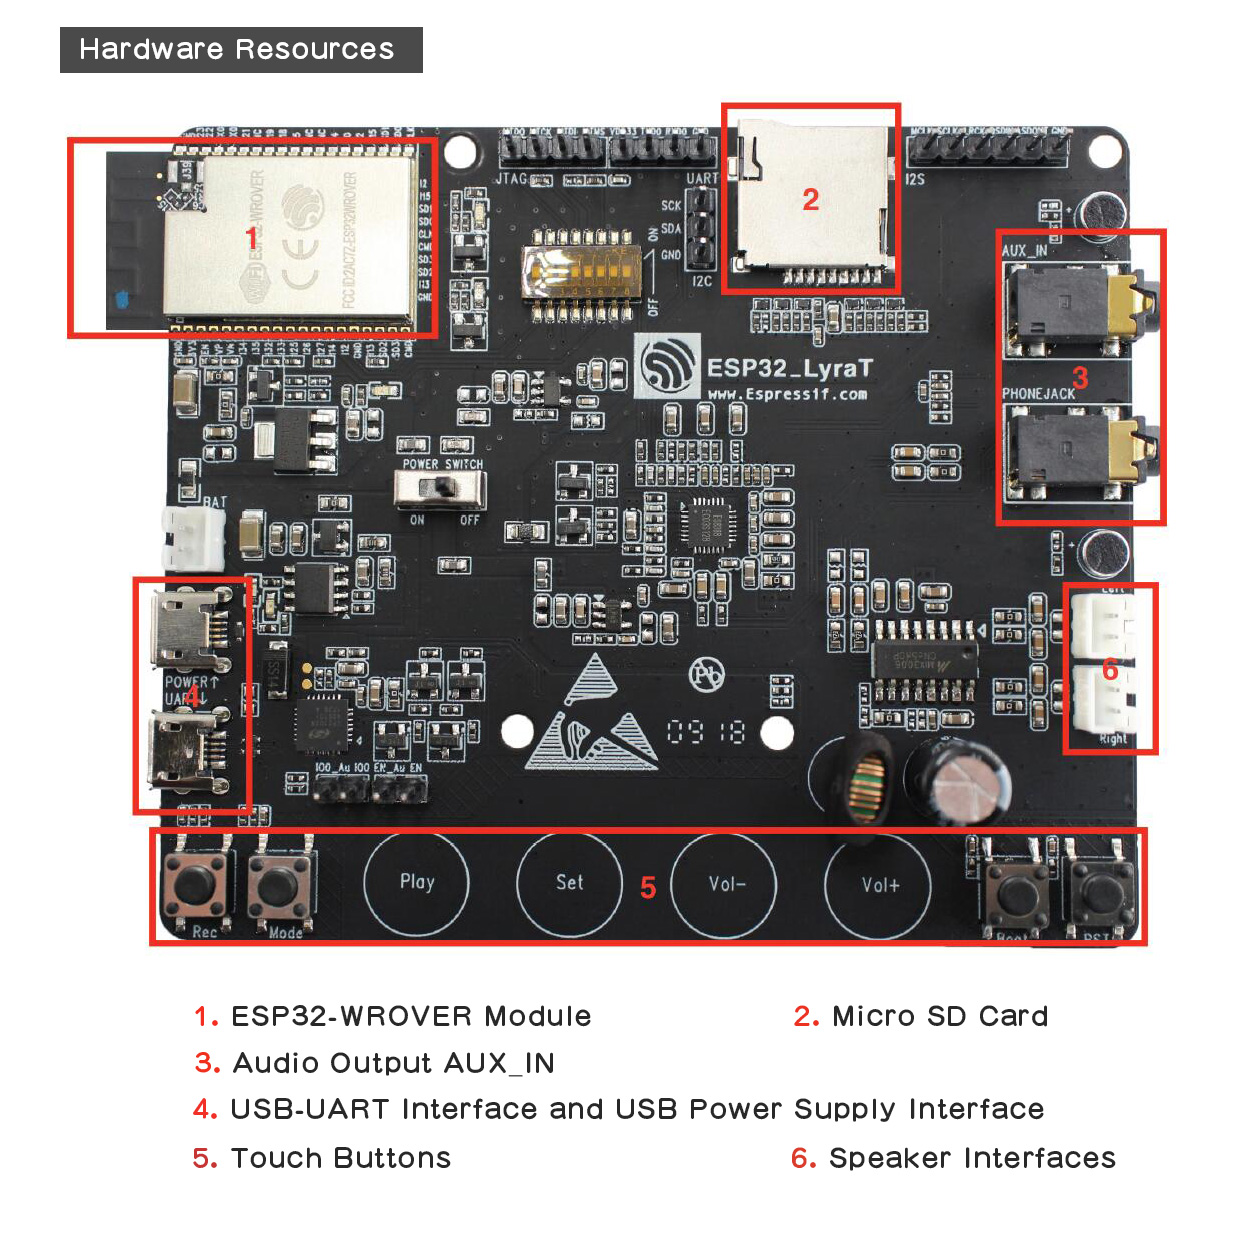 Espressif Official ESP32-LyraT Open-Source Voice Audio WiFi Bluetooth Development Board With Touch Physical Buttons Support PTZ